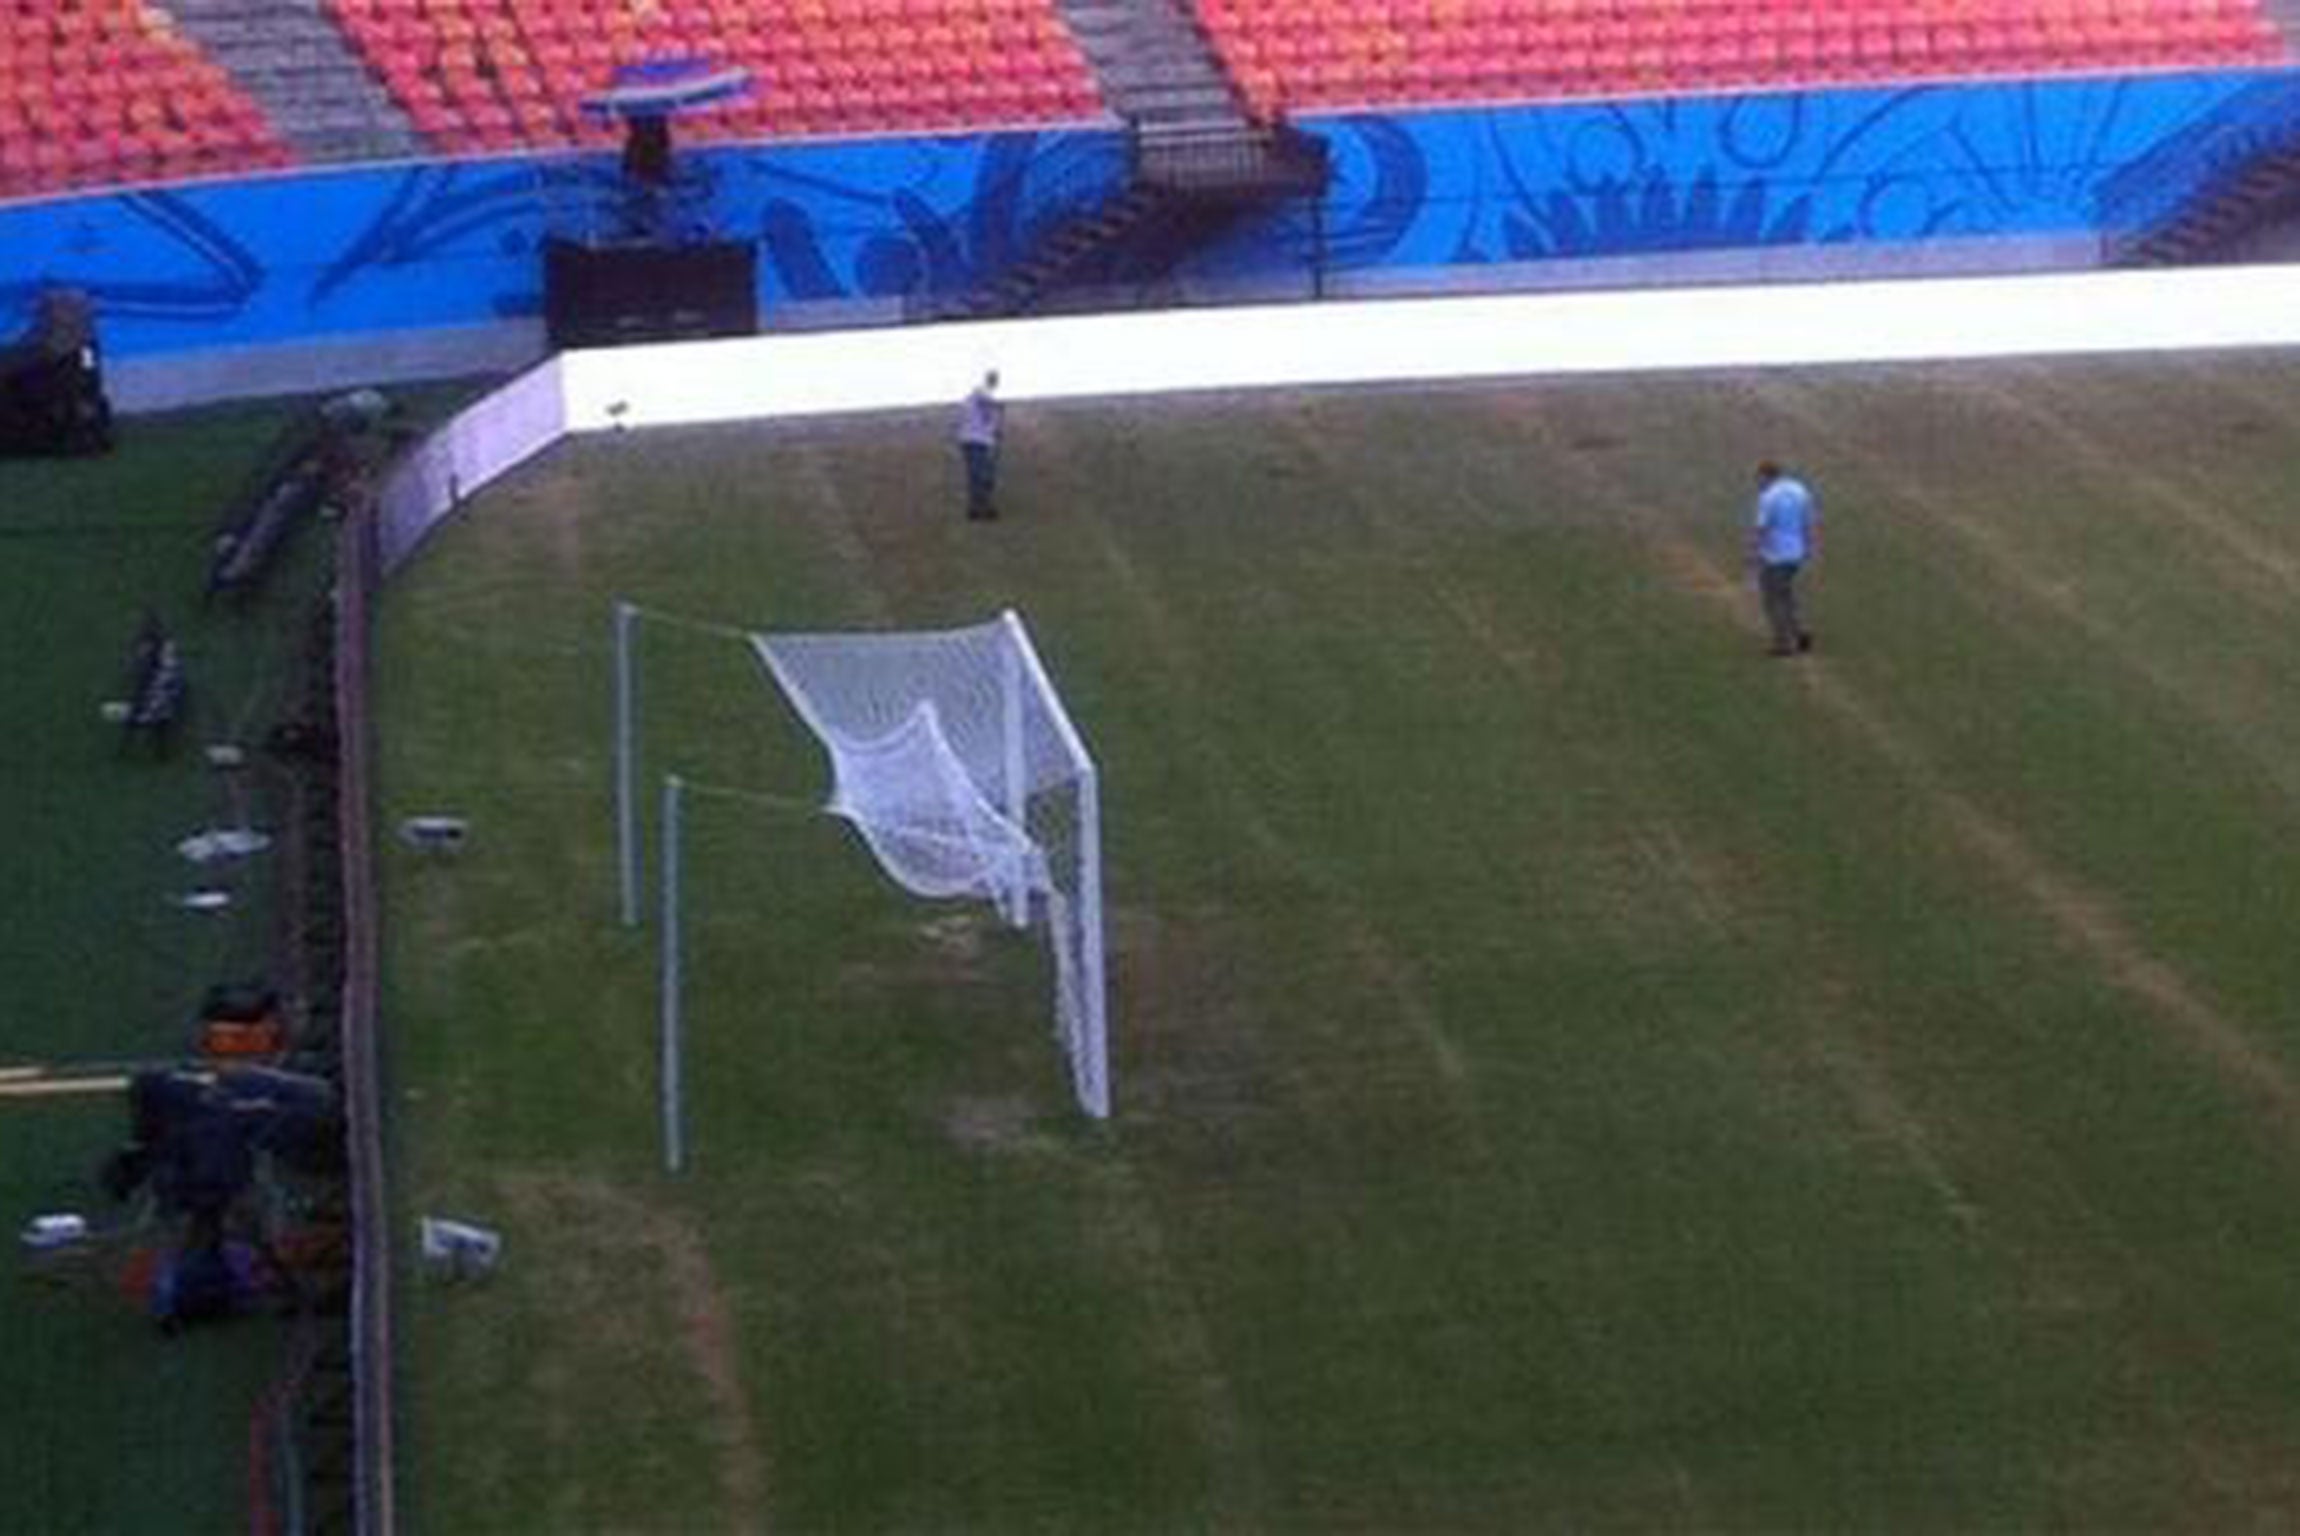 The pitch surface in Manaus just days before England v Italy